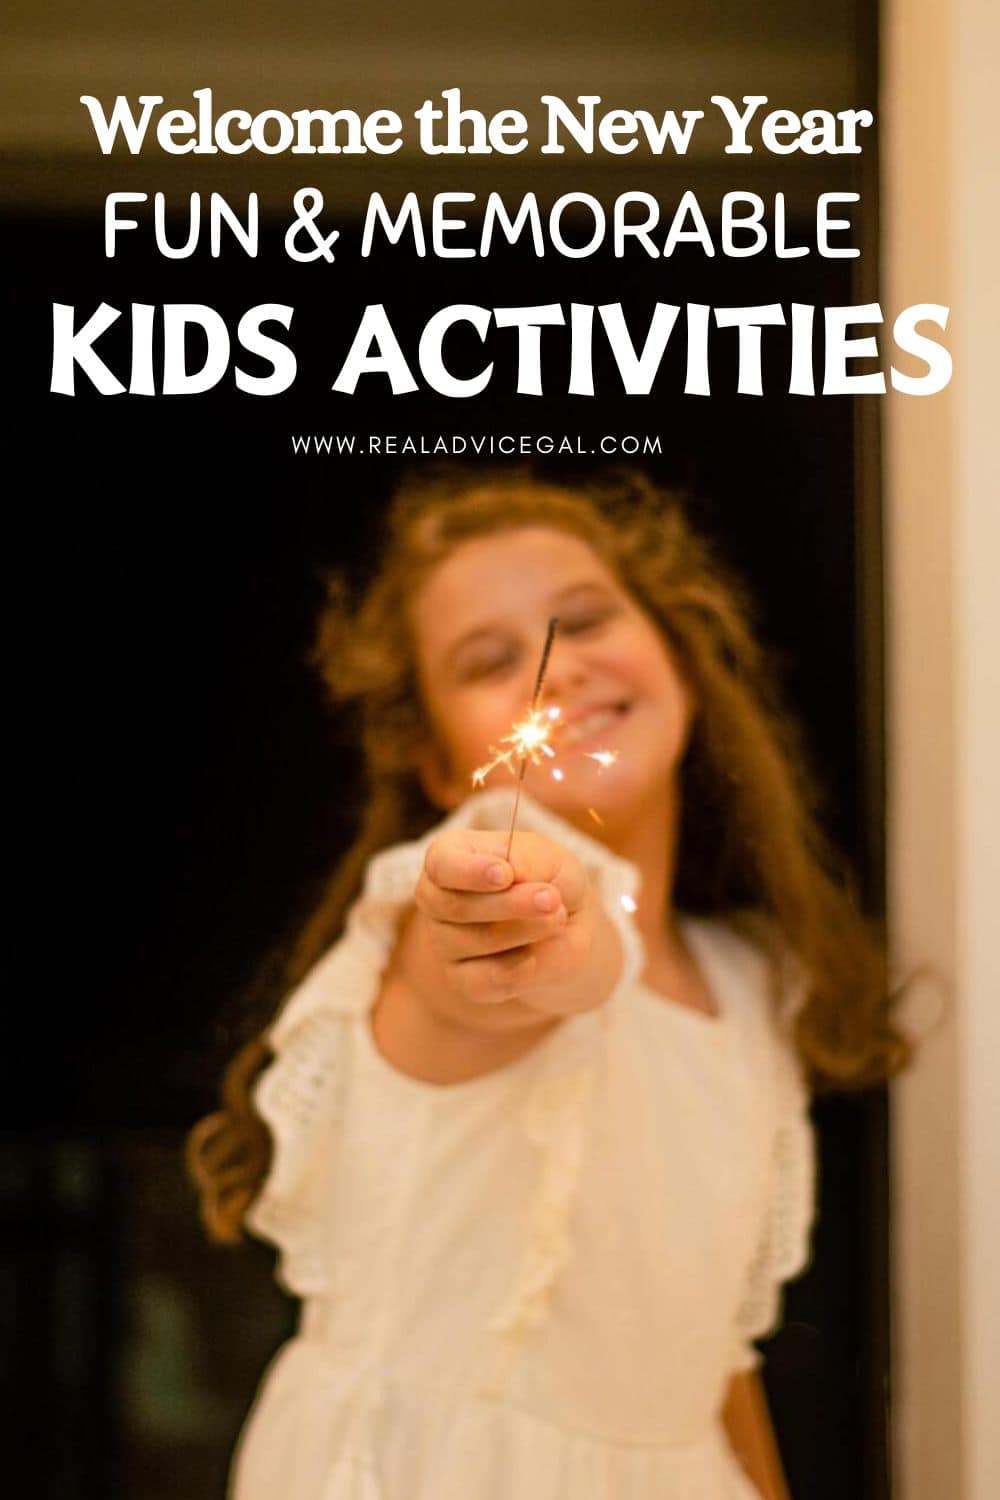  Ring in the New Year with joy and excitement as you explore these "Fun and Memorable New Year Kids Activities,"  